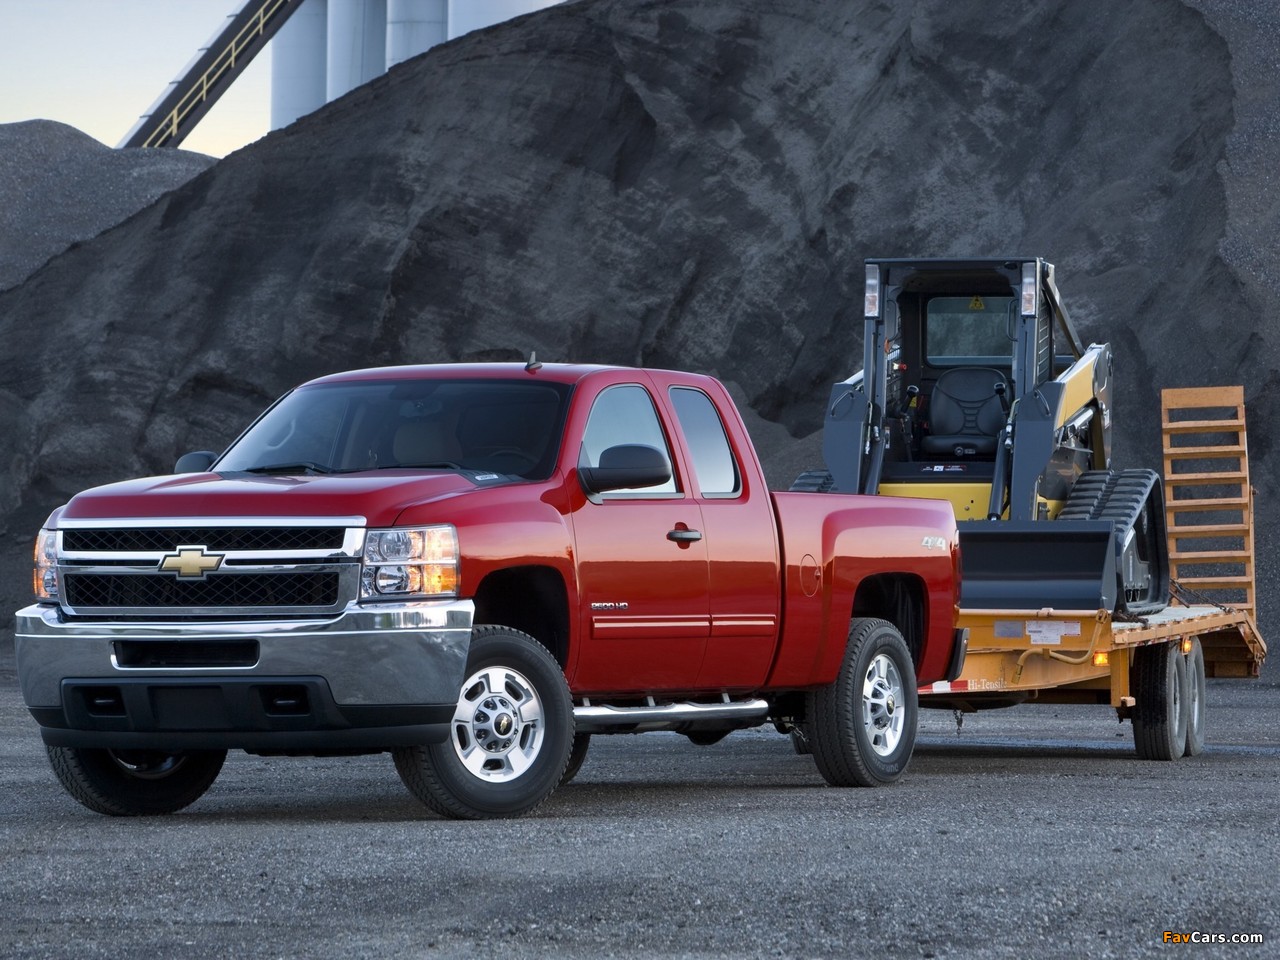 Chevrolet Silverado 2500 HD Extended Cab 2010 pictures (1280 x 960)